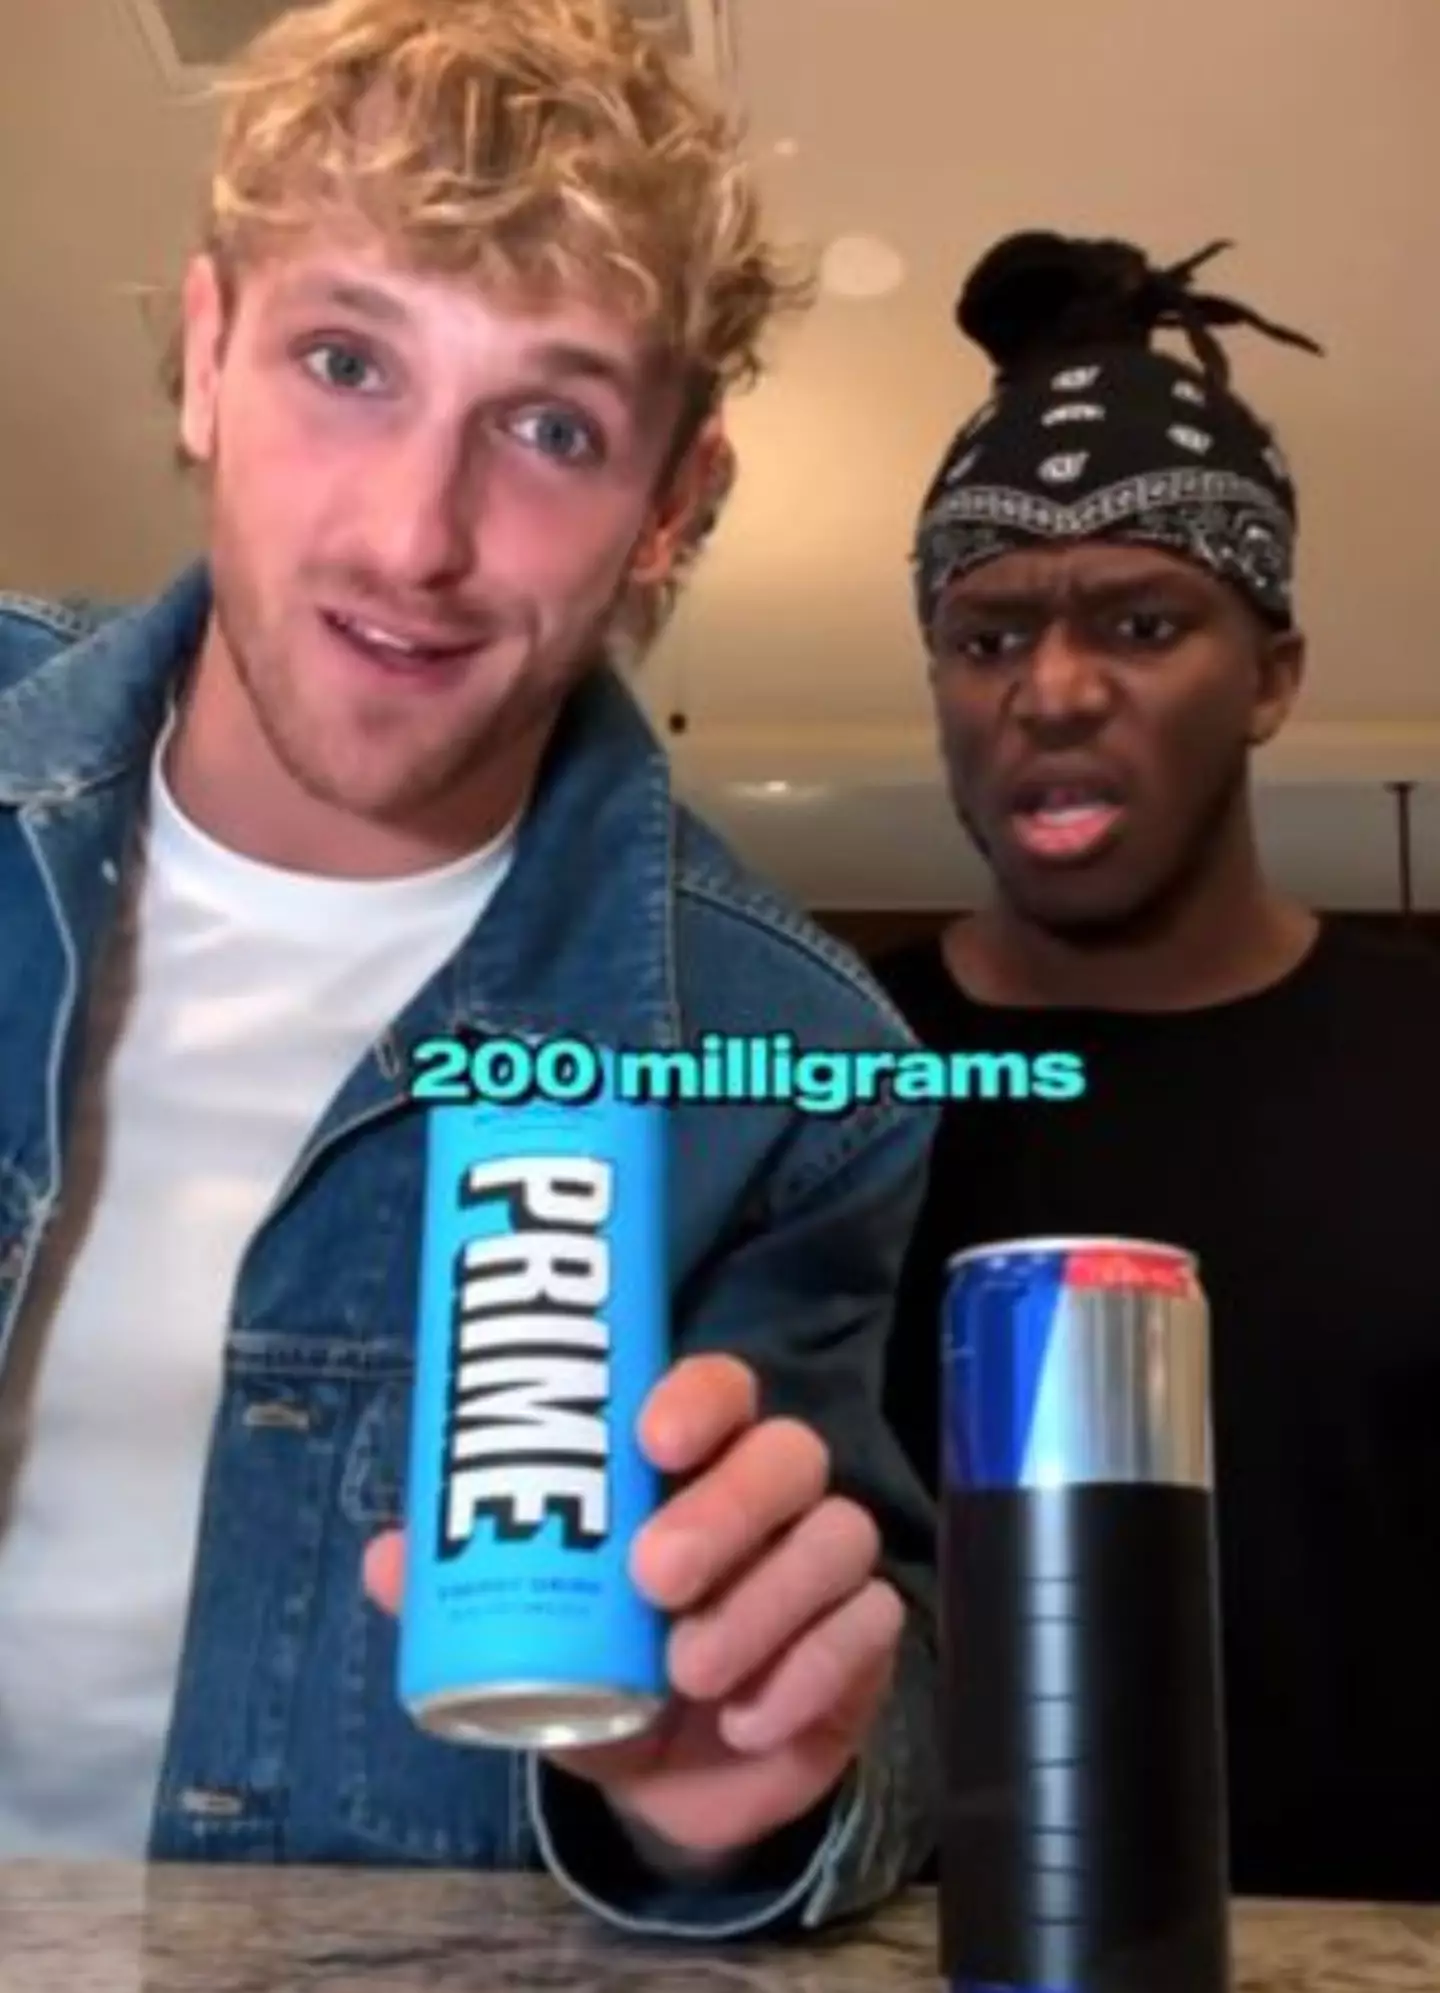 KSI and Logan Paul launched the drink in the US.